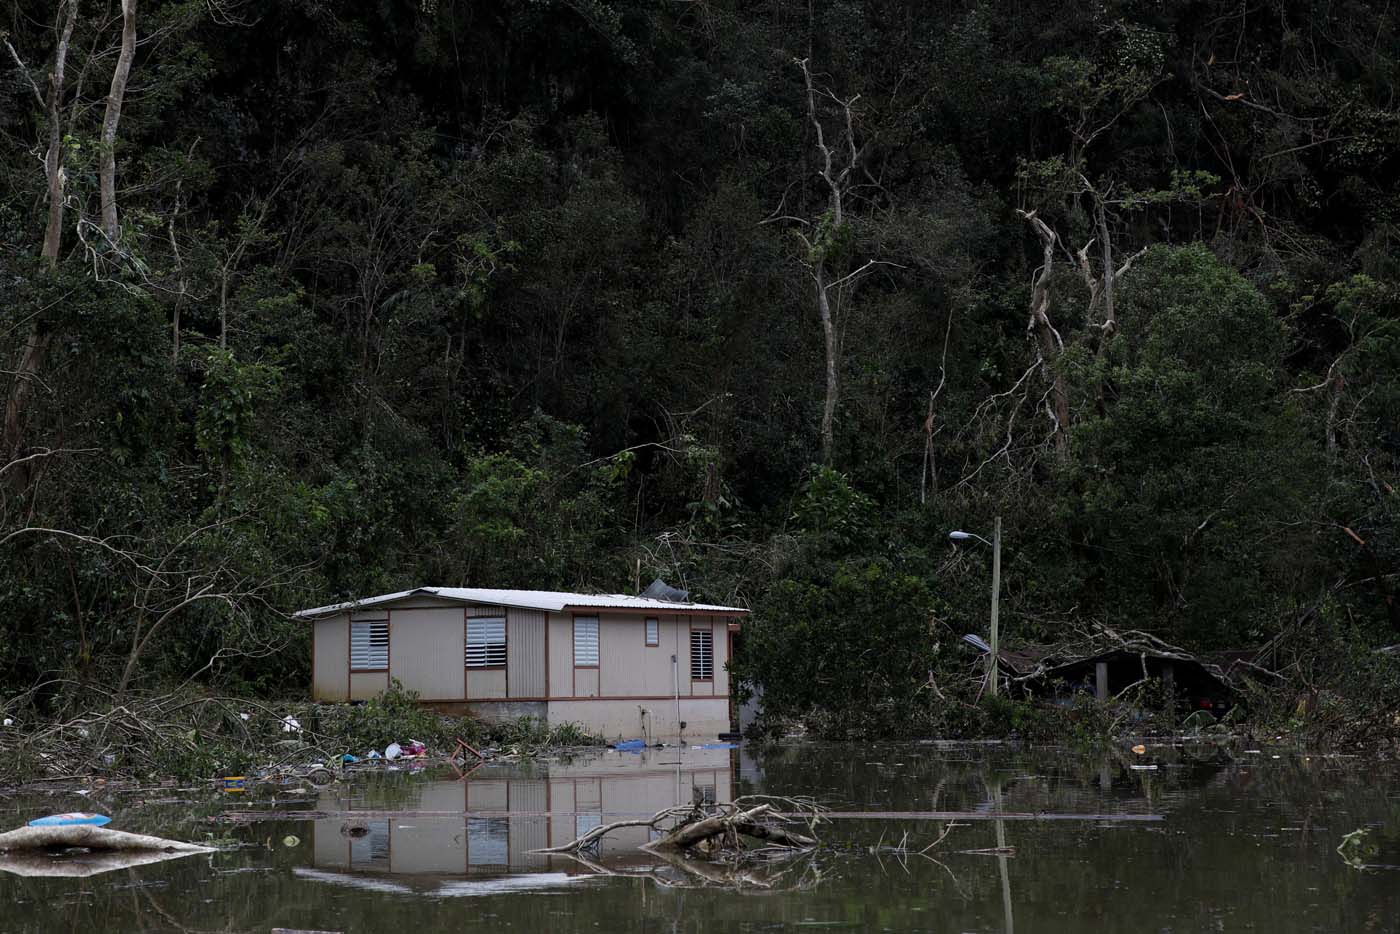 Houses damaged by flood waters are seen close to the dam of the Guajataca lake after the area was hit by Hurricane Maria in Guajataca, Puerto Rico September 23, 2017. REUTERS/Carlos Garcia Rawlins